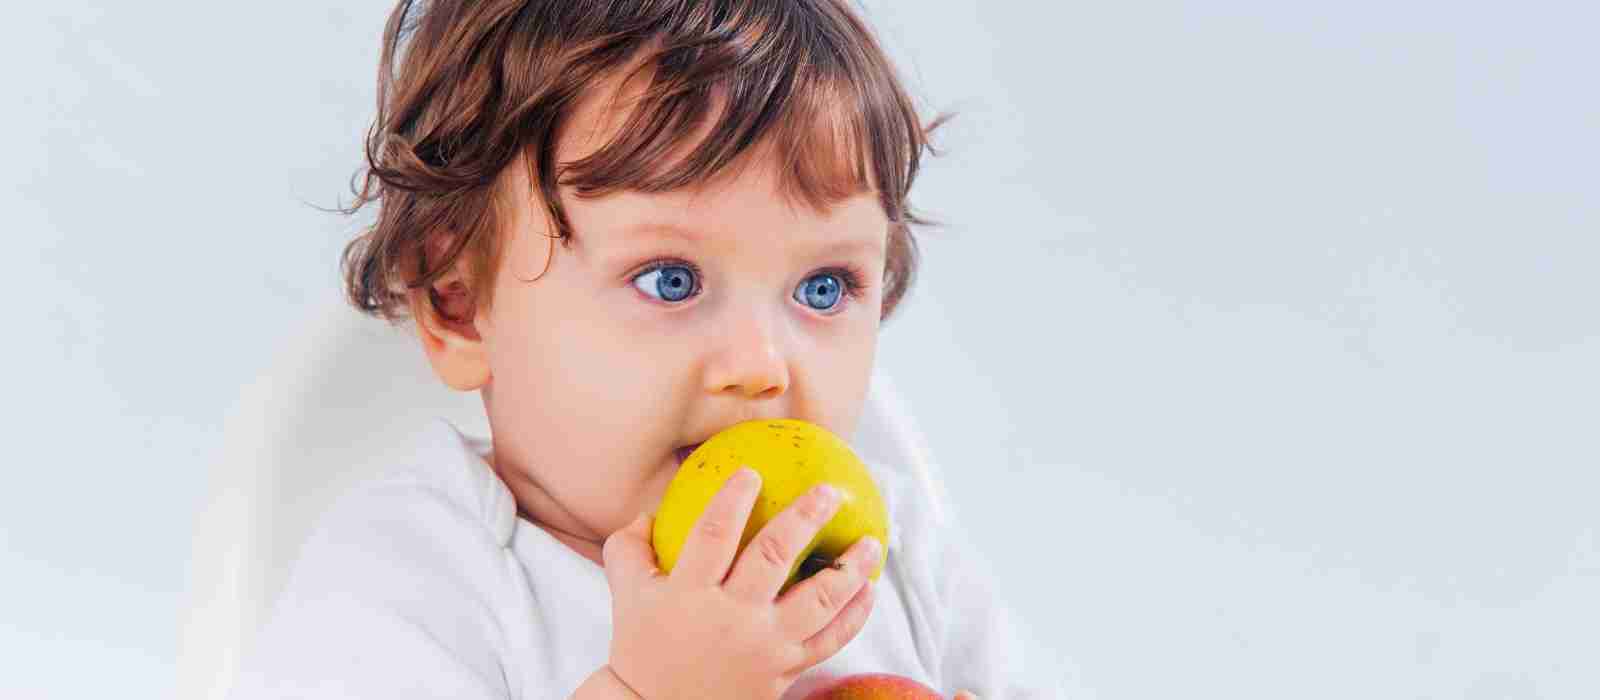 When Can Baby Eat Raw Apples